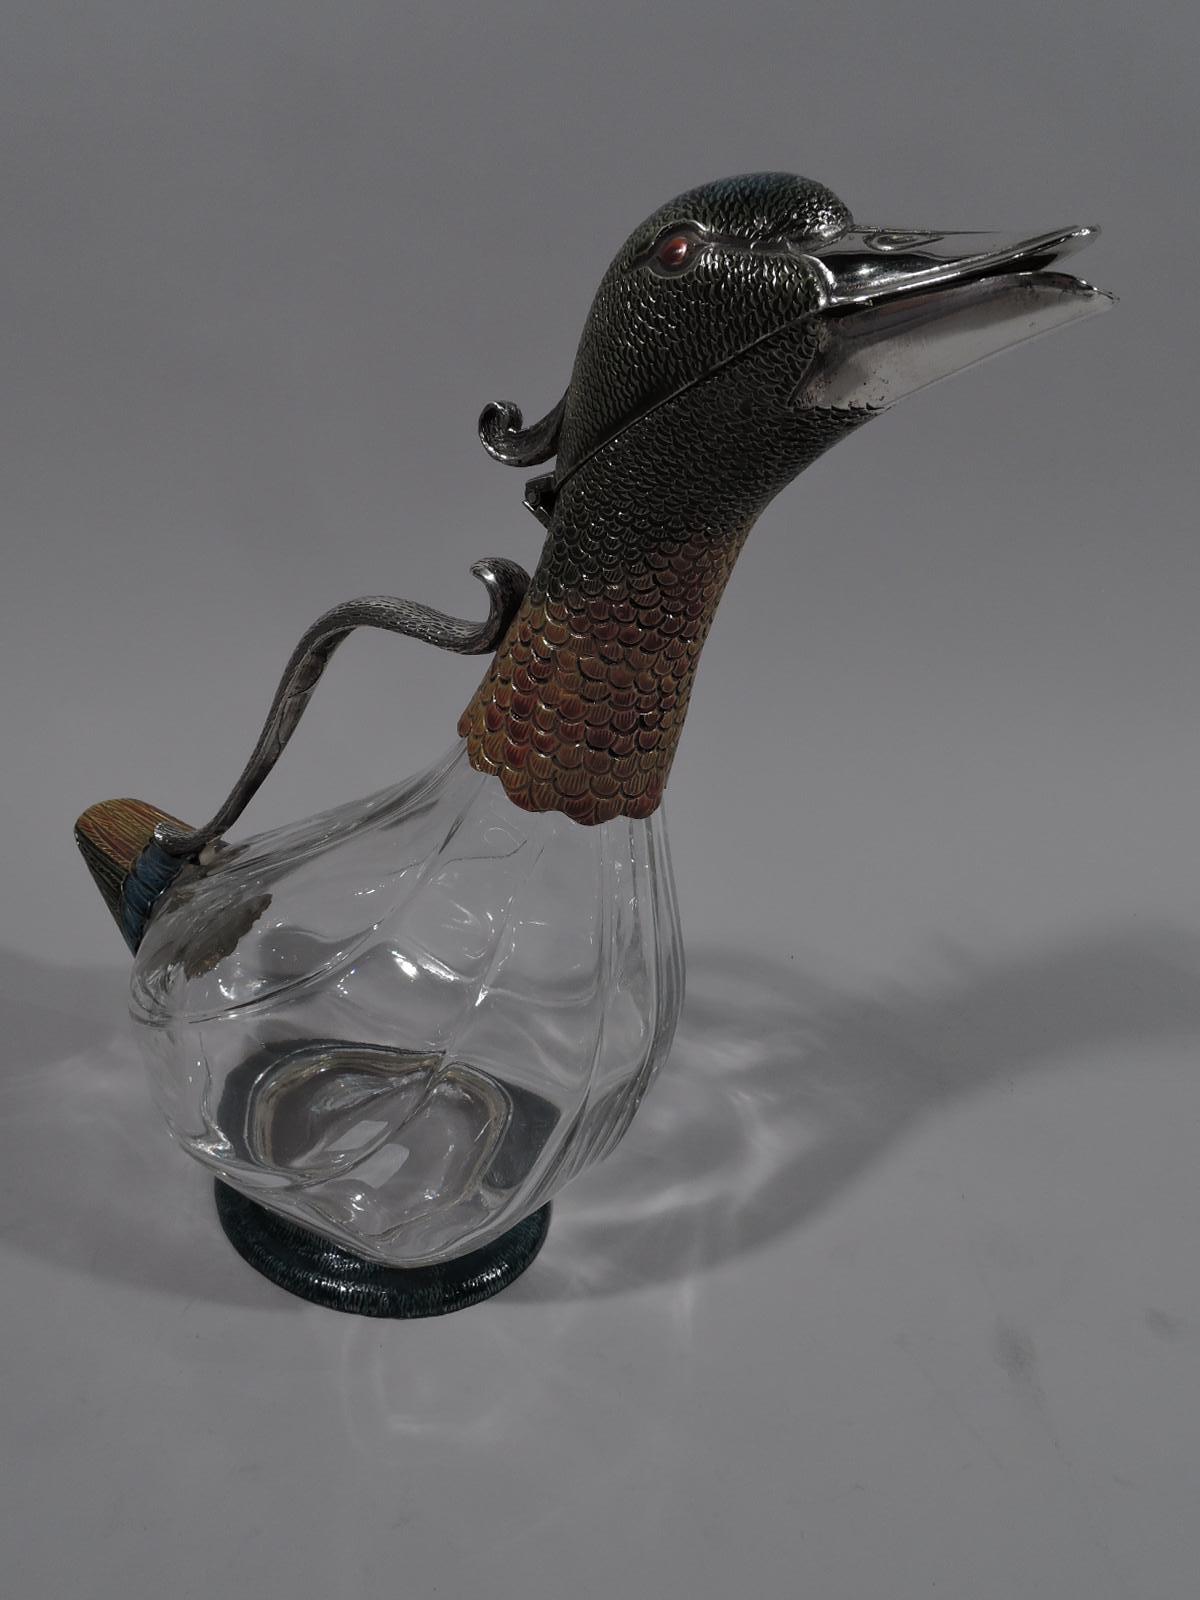 Modern glass and enameled sterling silver figural bird decanter. A duck with clear glass body. Head and neck enameled sterling silver with scaly and stippled feathers. Compact triangular tail and round foot. Head hinged for pouring. “Quack, quack”